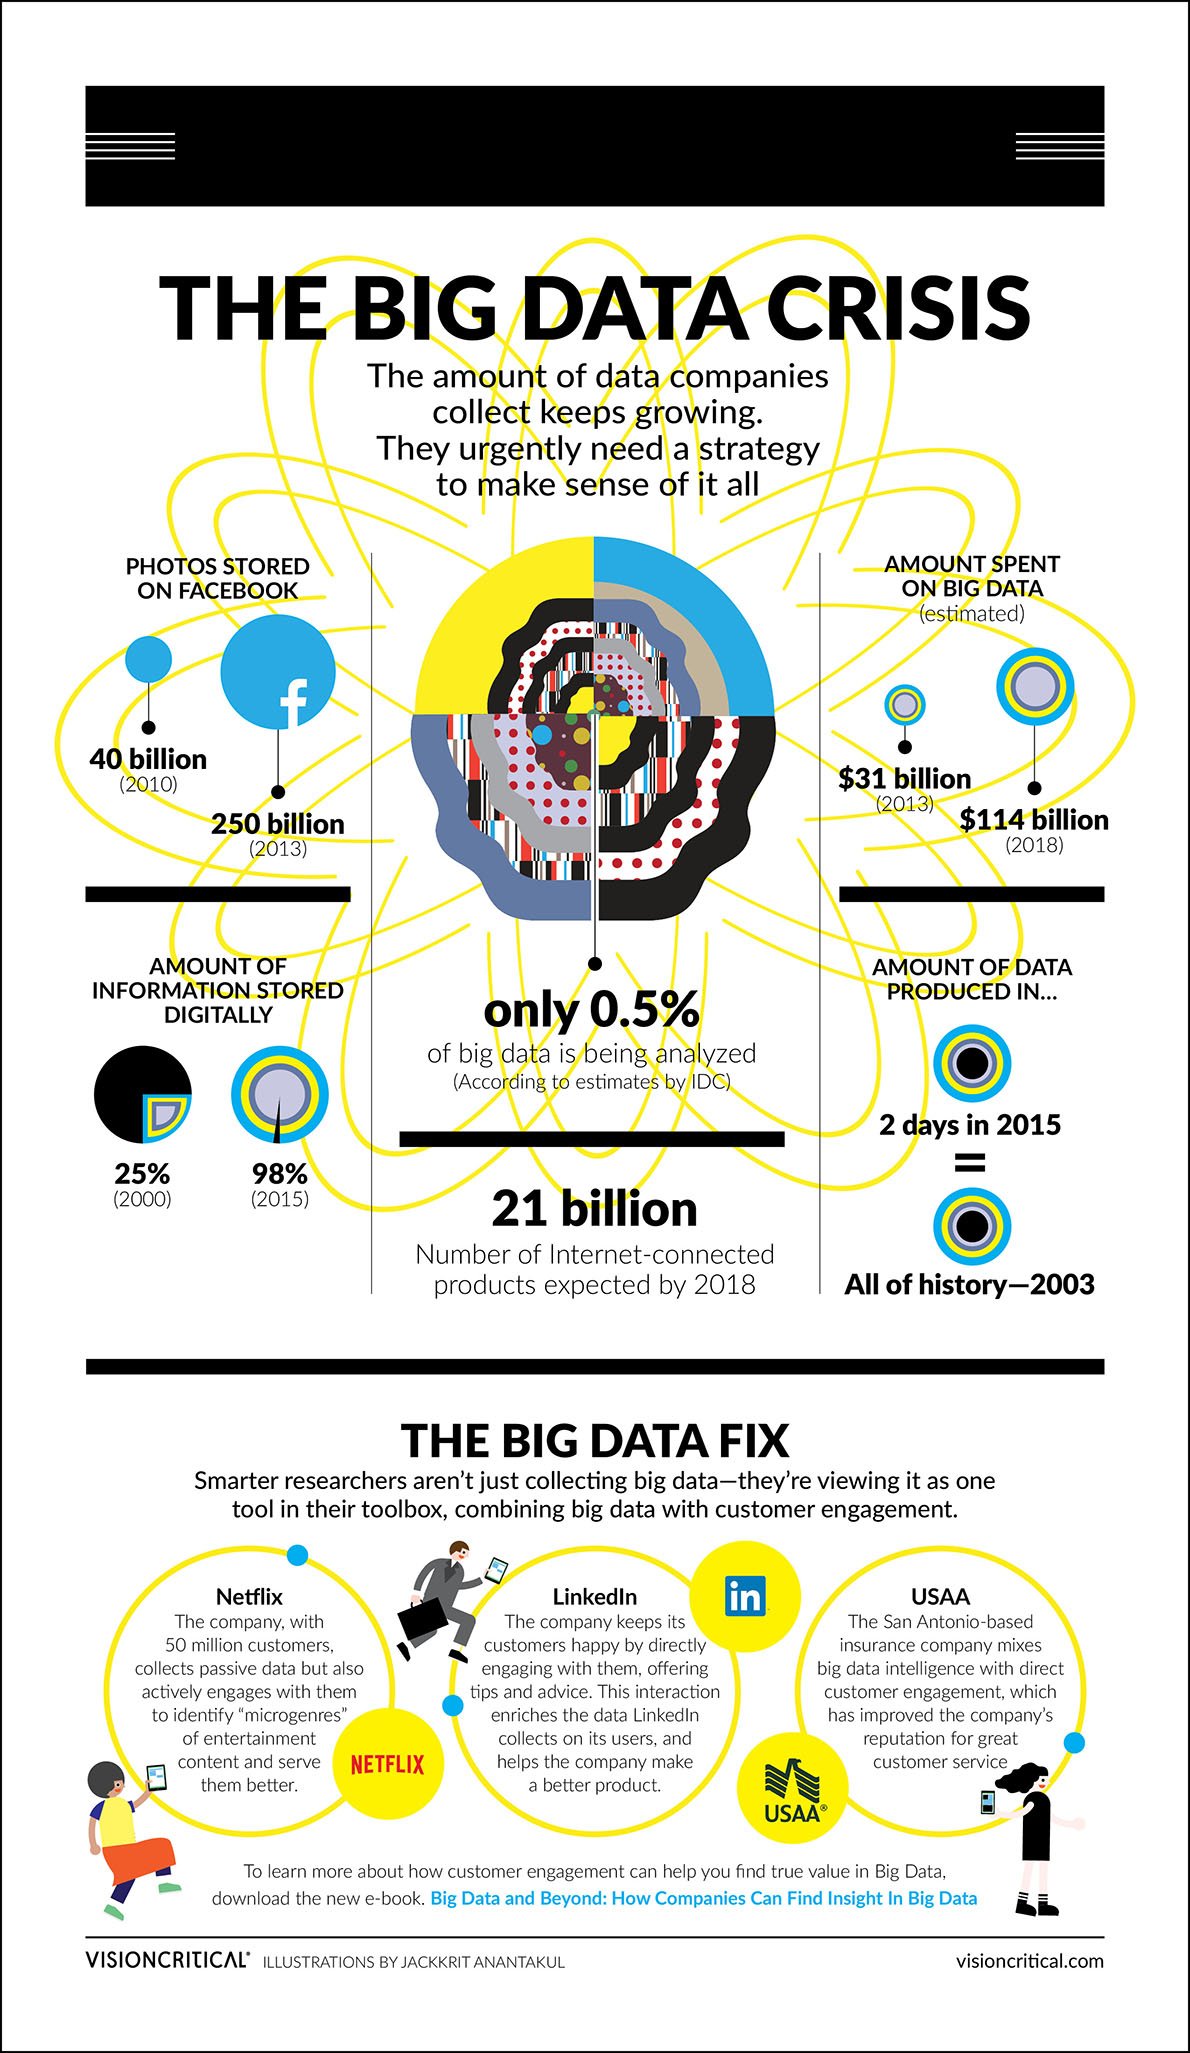 Infographic: Commercial Data Management For Faster Meaningful Insights